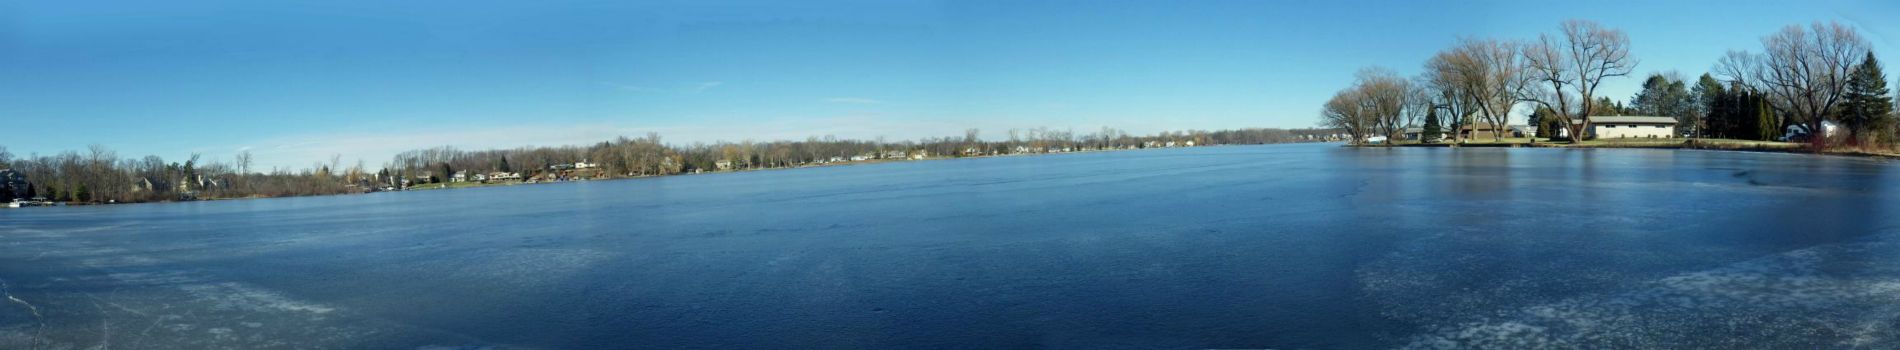 North Commerce Lake. Jan 16, 2013. See the full size here.